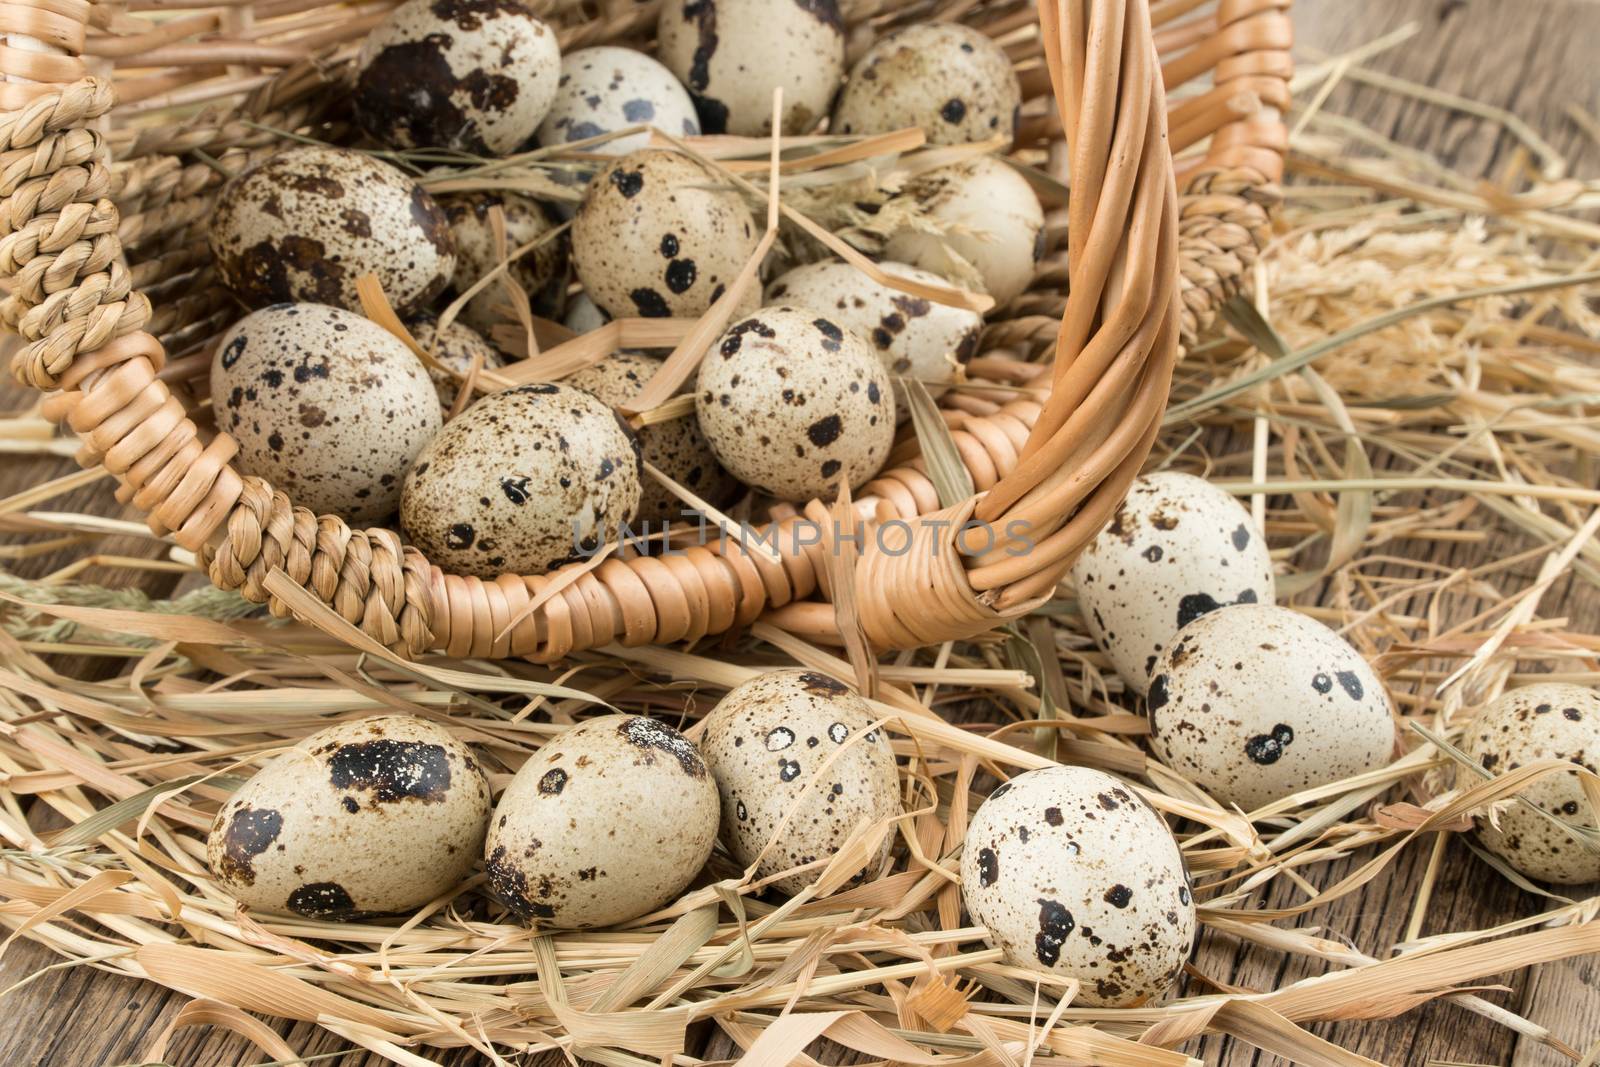 Quail eggs in a basket on old wooden table. by DGolbay